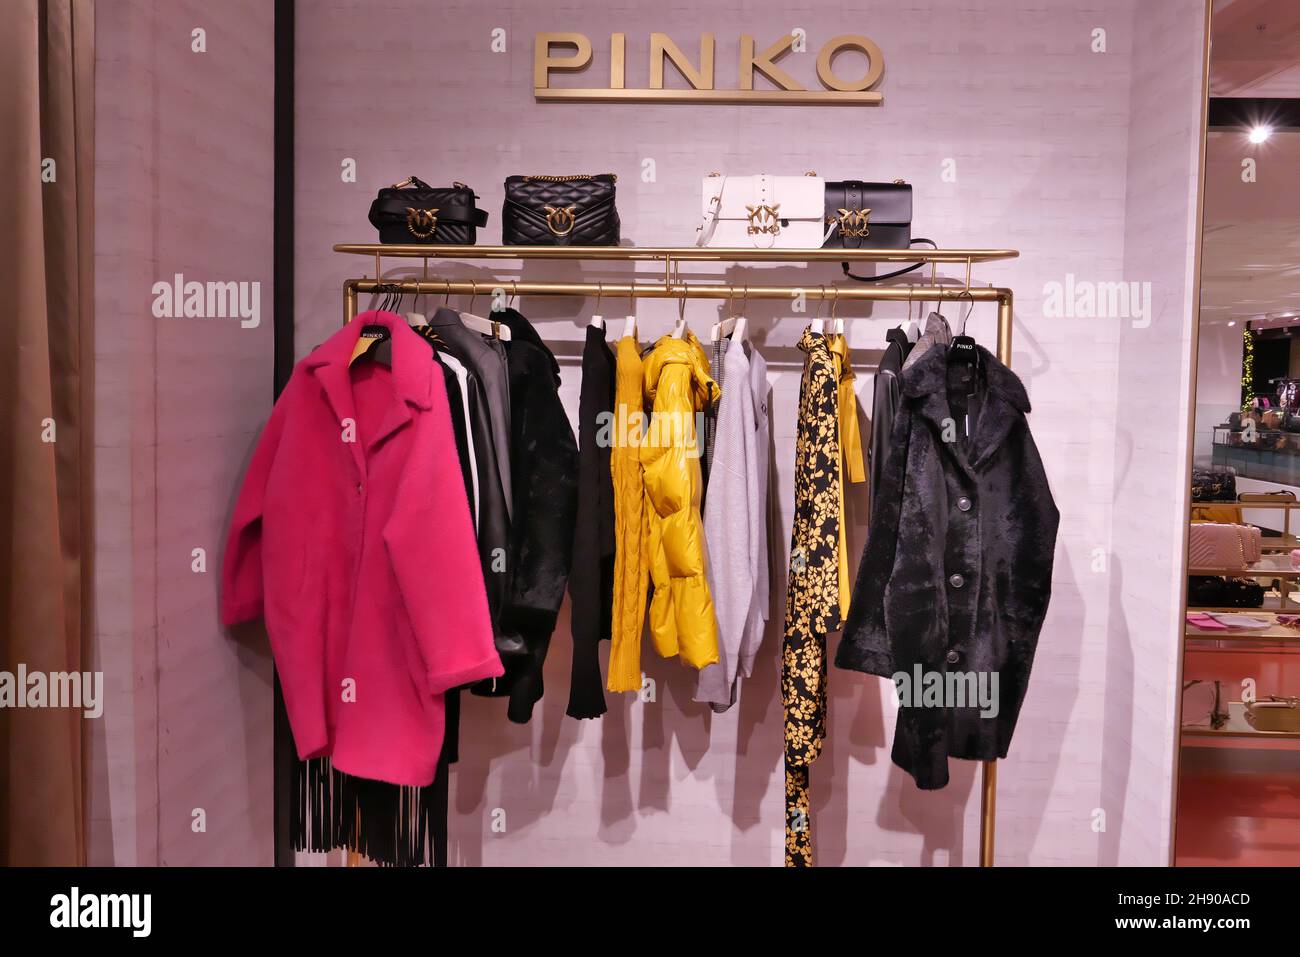 PINKO CLOTHING ON DISPLAY INSIDE THE ...